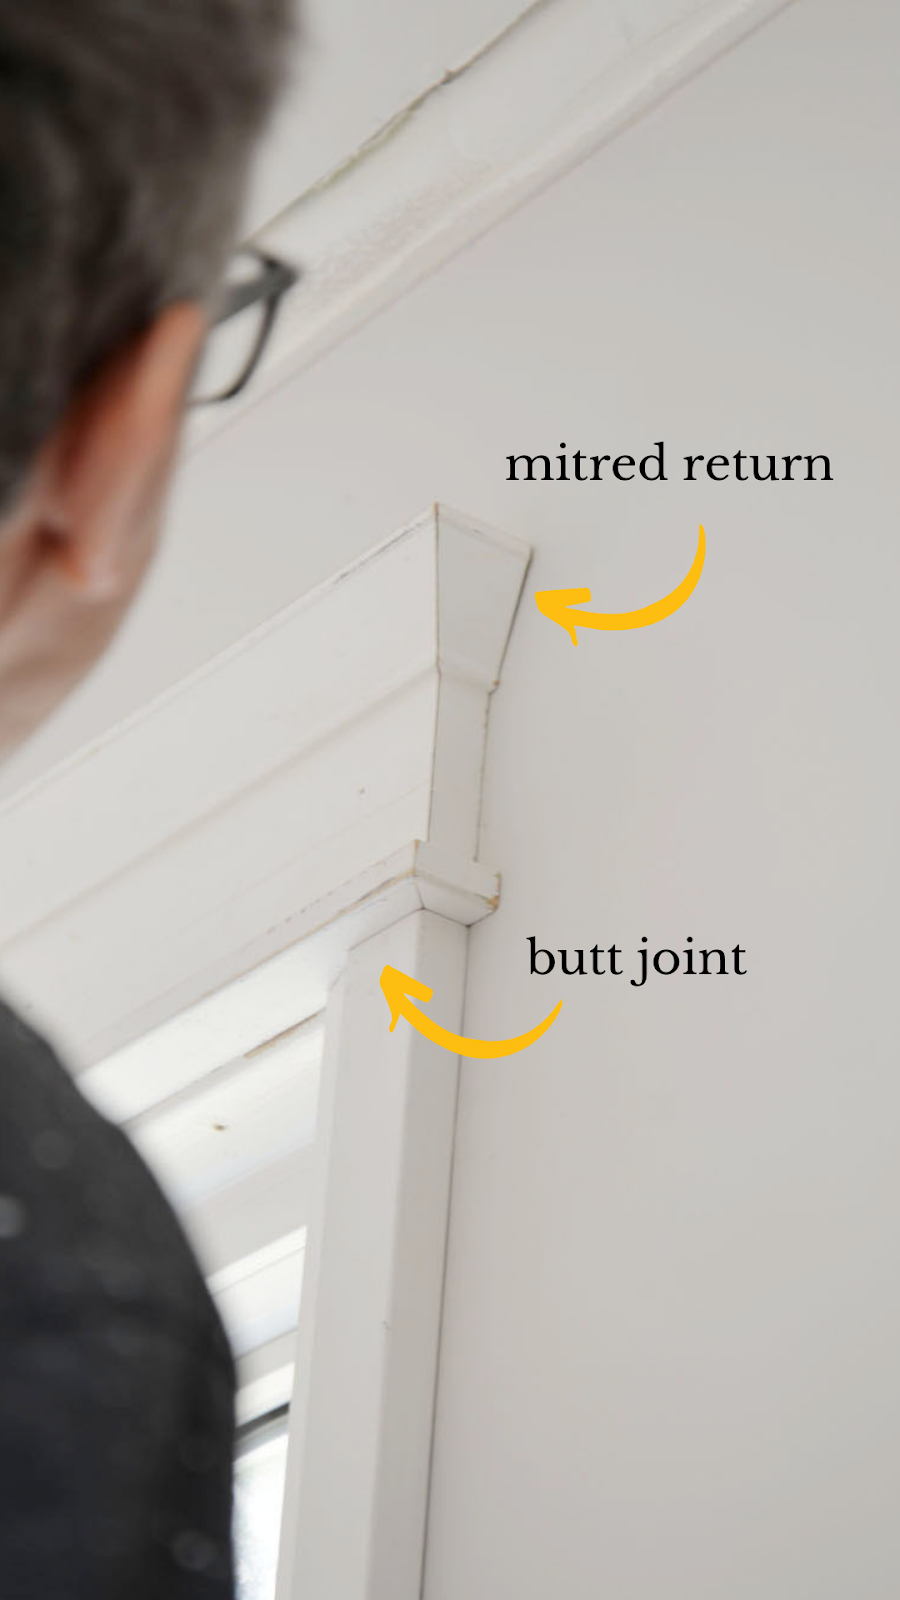 mitred return, butt joint, trim joint, how to join moulding, window casing installation, traditional moulding, shiplap alternatives